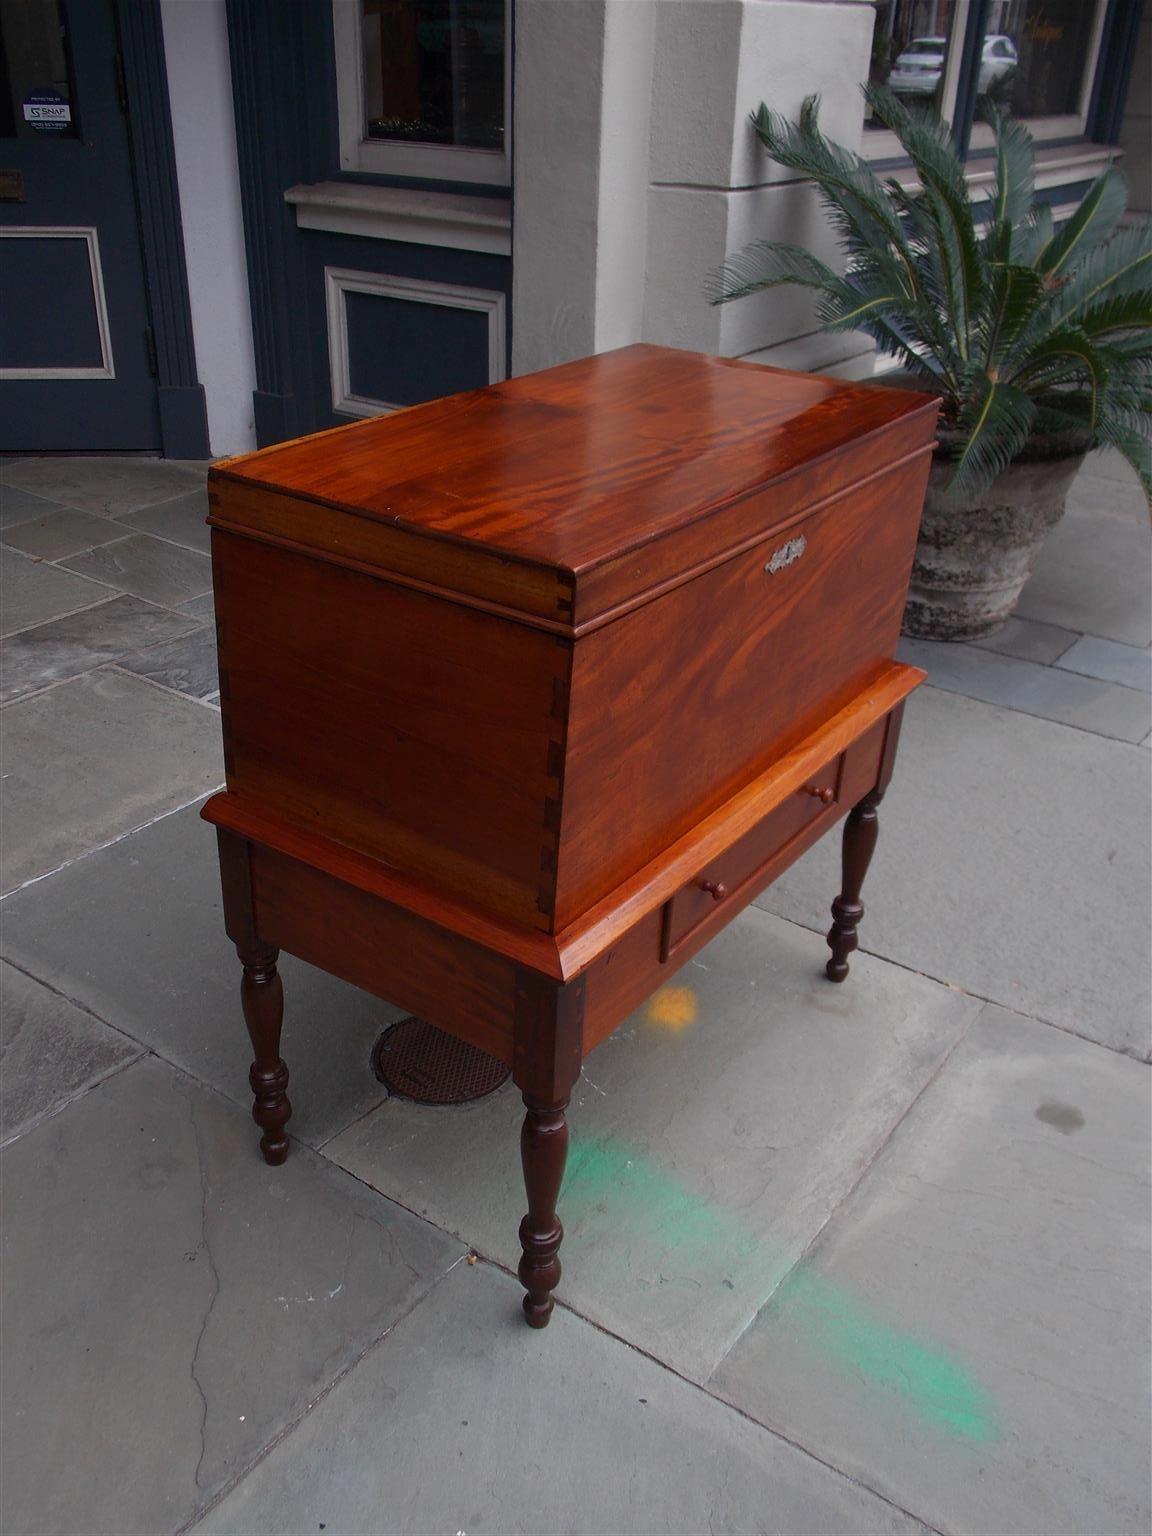 American Federal mahogany and Spanish cedra one drawer hinged sugar chest on stand with carved molded edge, exposed dovetails, wooden knobs, silver escutcheon, original keys, and resting on the original turned bulbous ringed legs, Early 19th